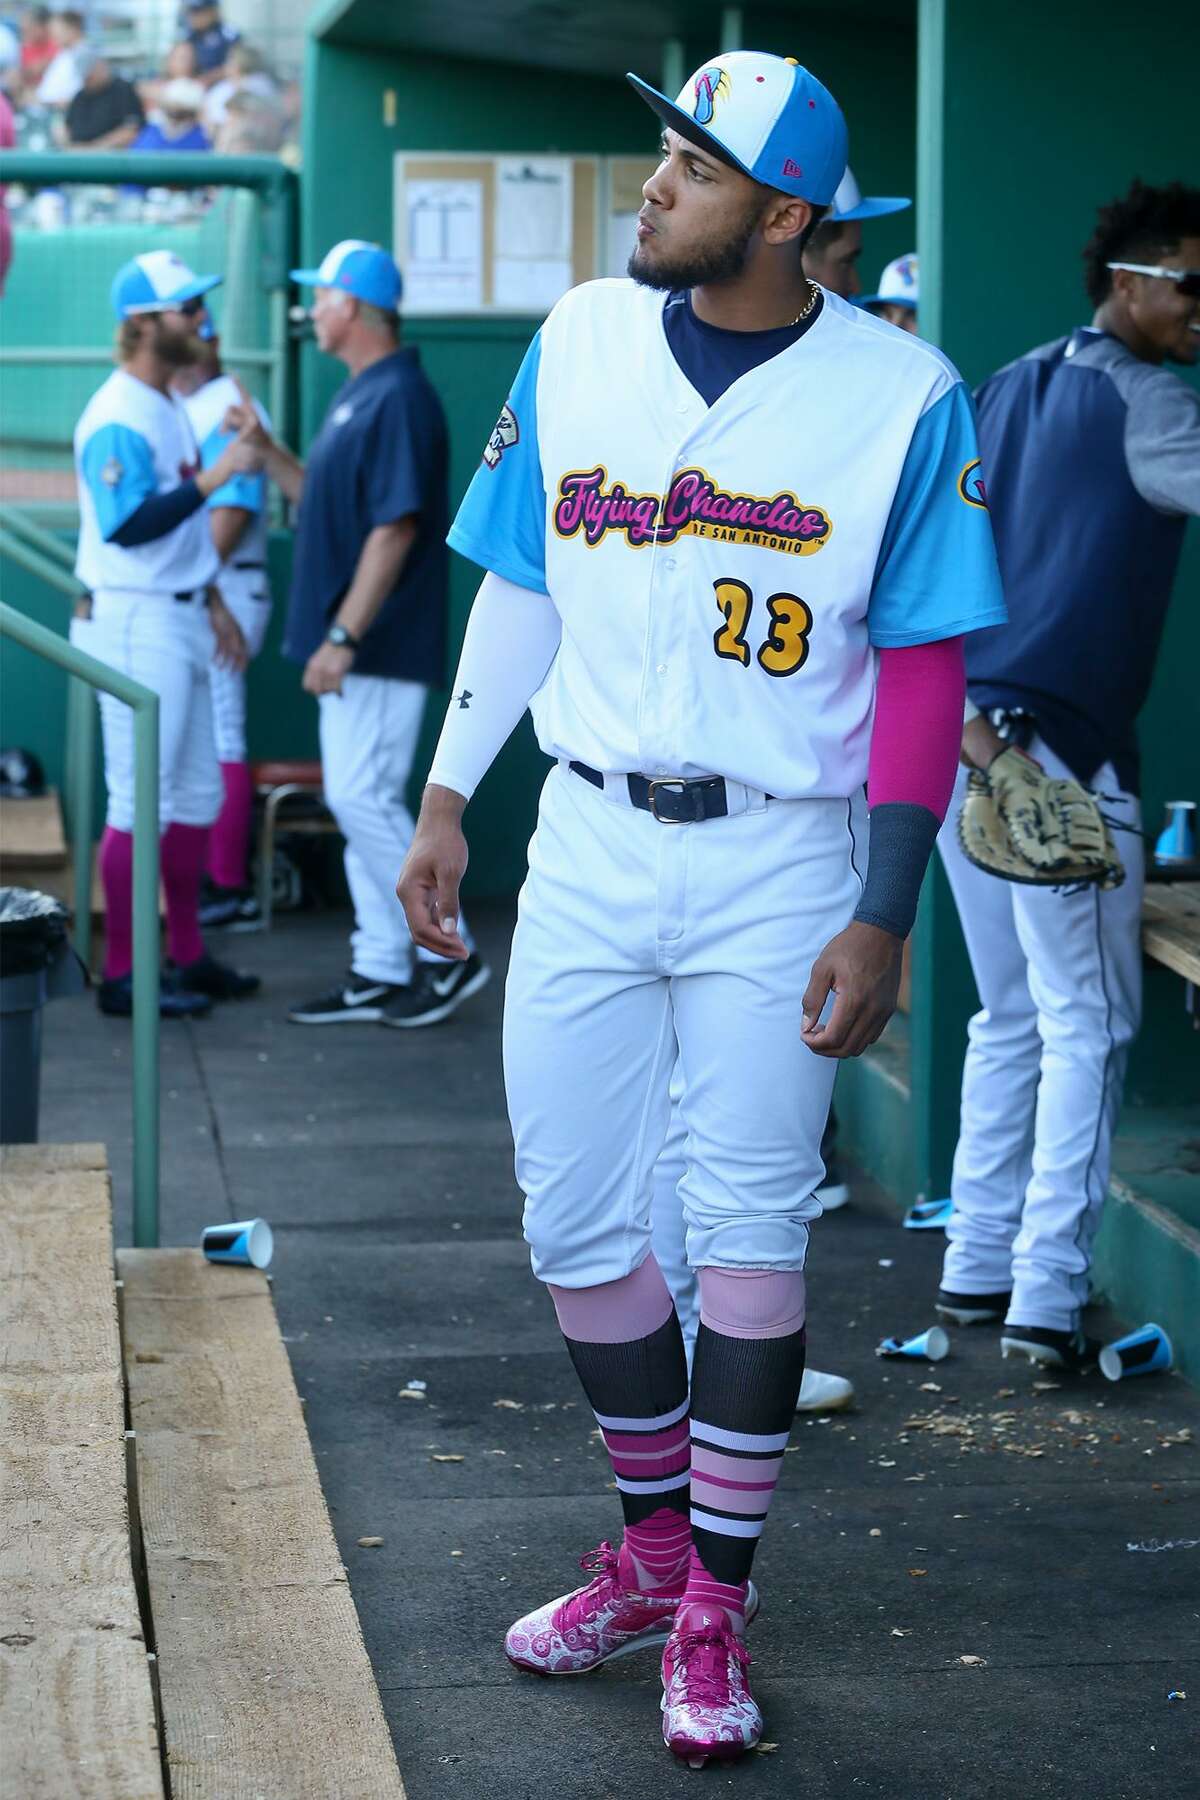 Fernando Tatis Jr. gets ready in the dugout for the start of the Flying Chanclas' game with Tulsa at Wolff Stadium on Thursday, May 24, 2018. MARVIN PFEIFFER/mpfeiffer@express-news.net